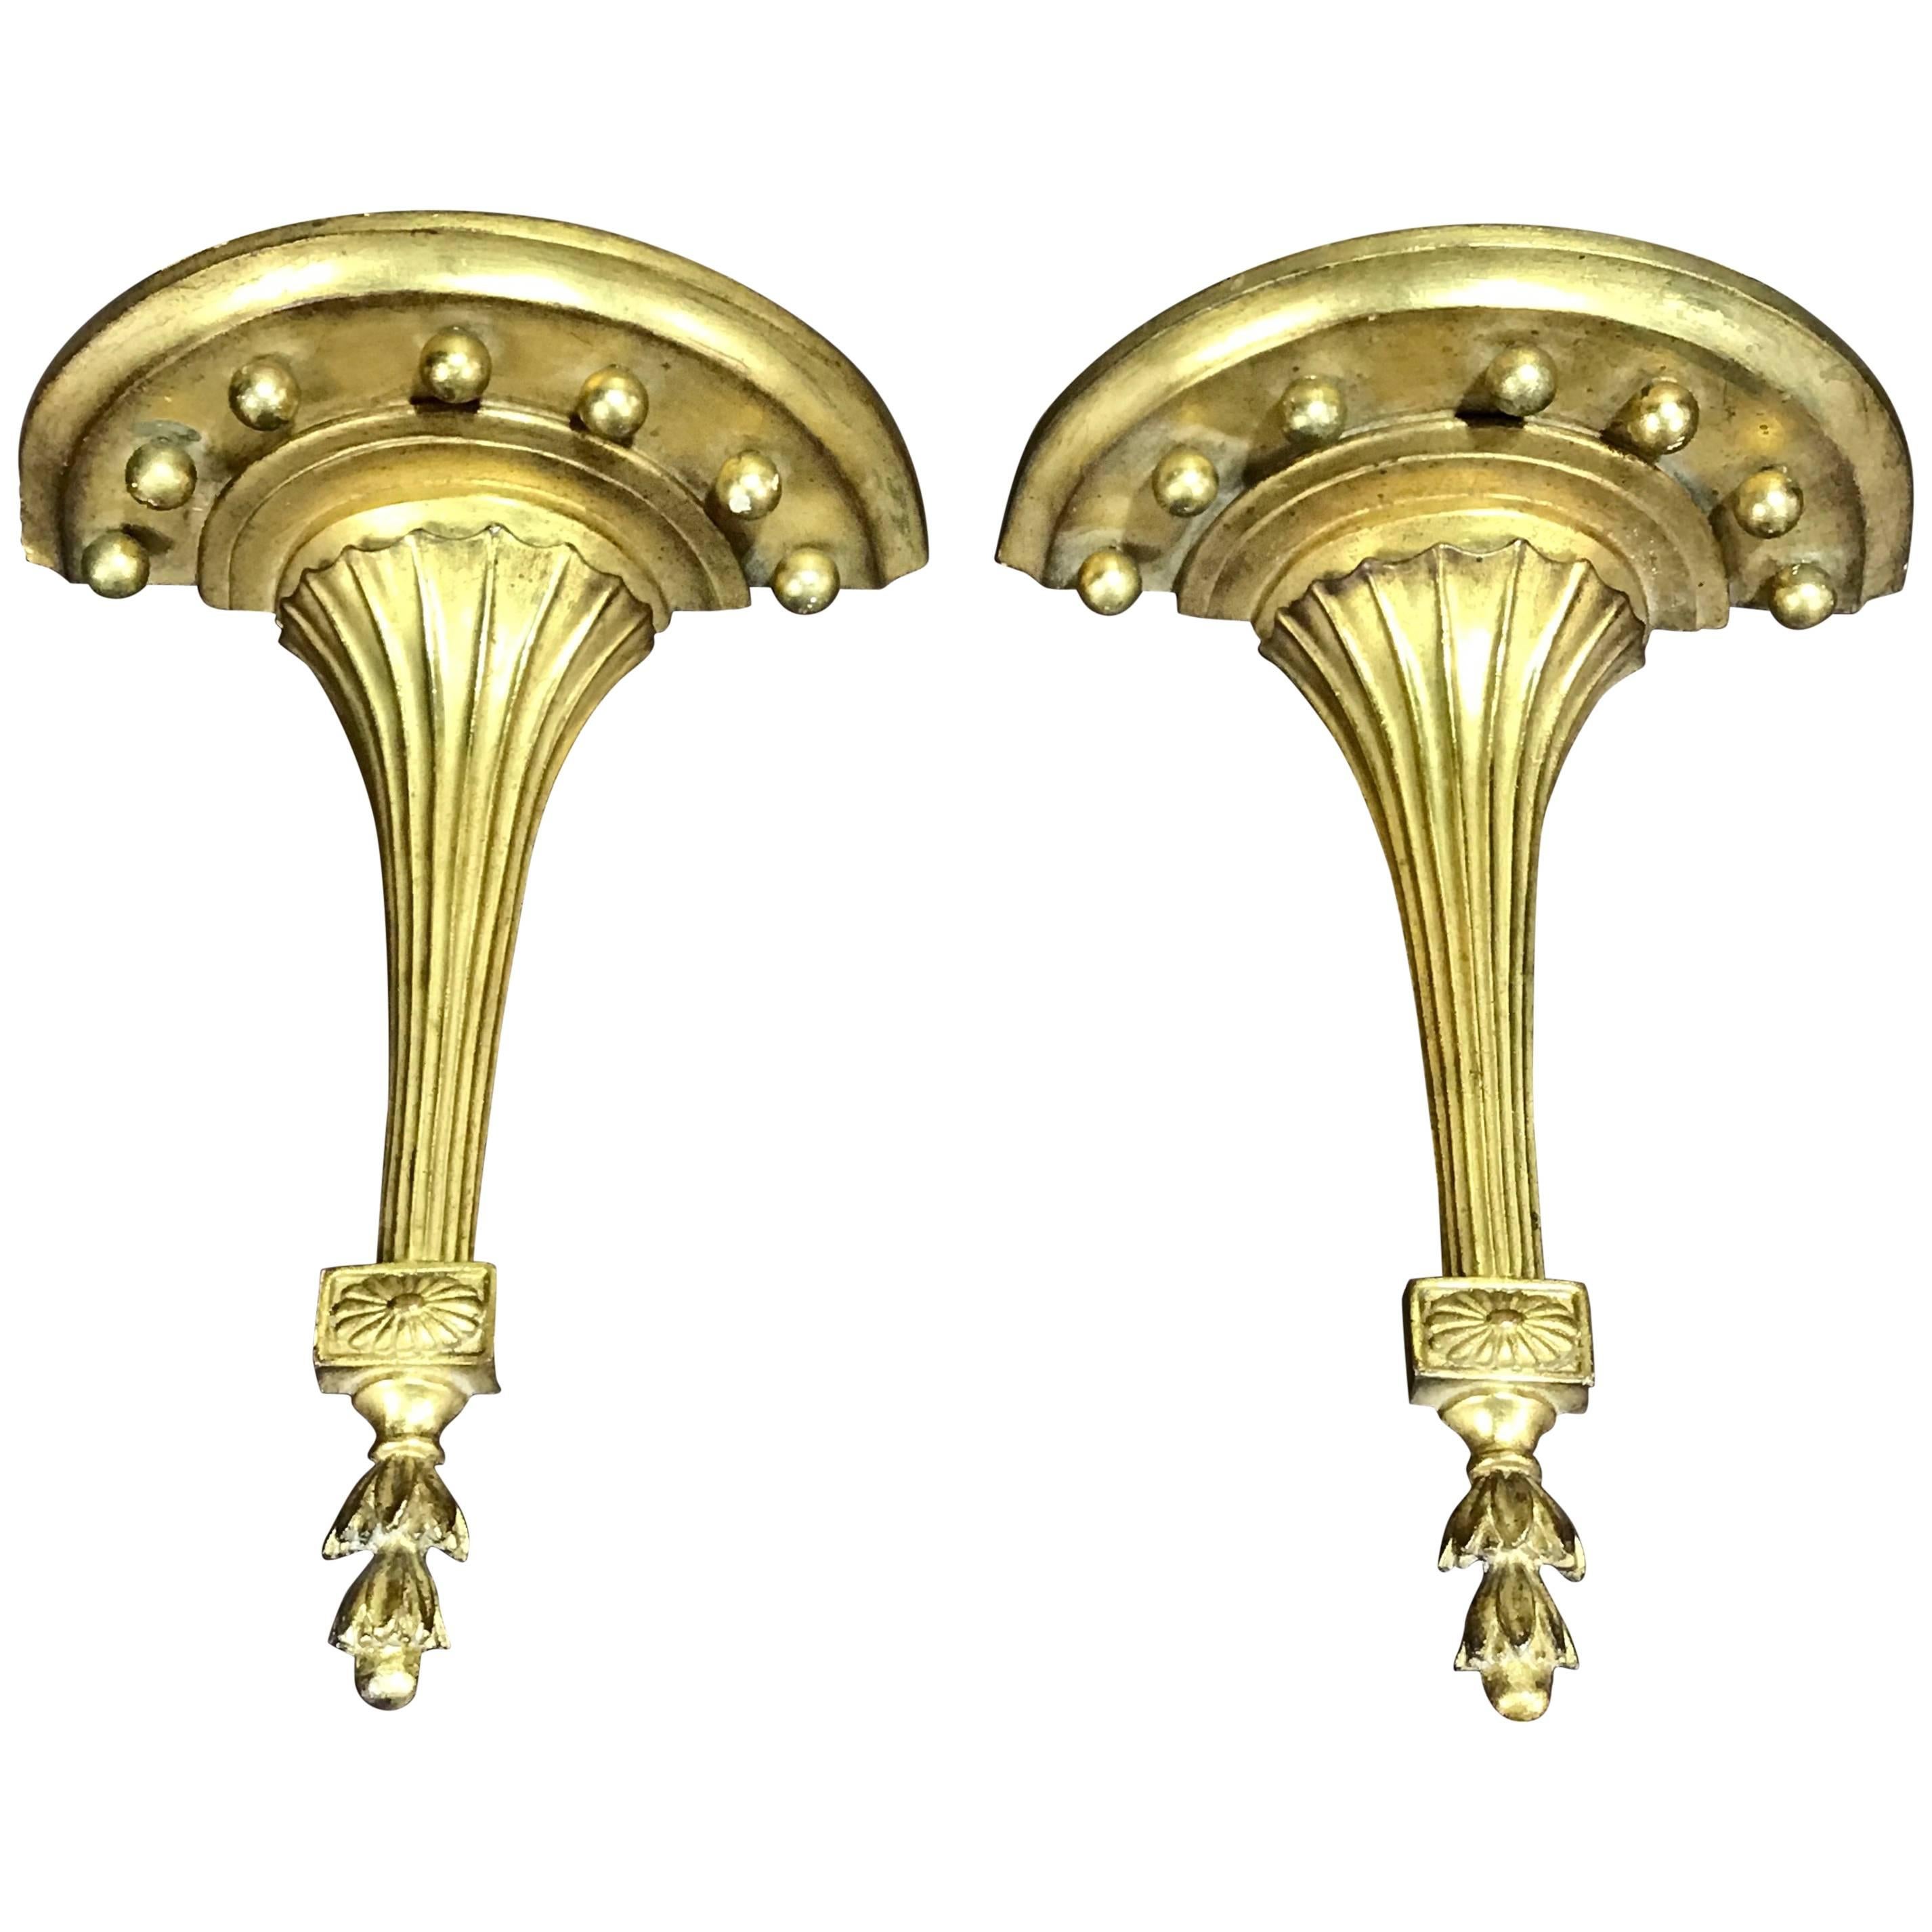 Pair of Tall and Sleek Neoclassical Gilt Wall Brackets, by Borghese